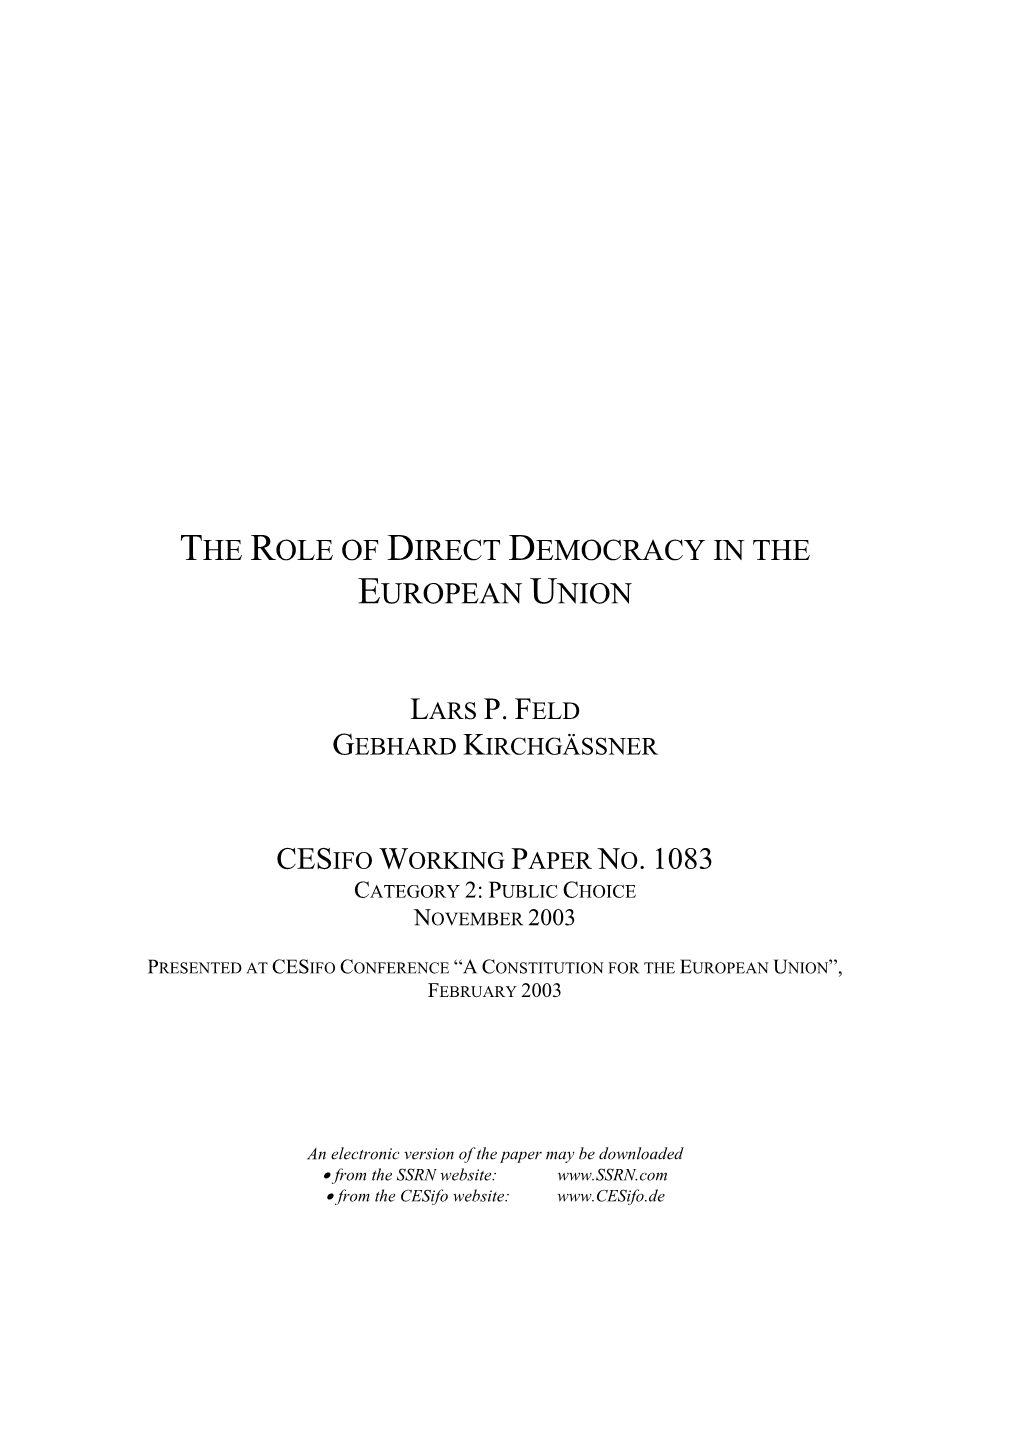 The Role of Direct Democracy in the European Union